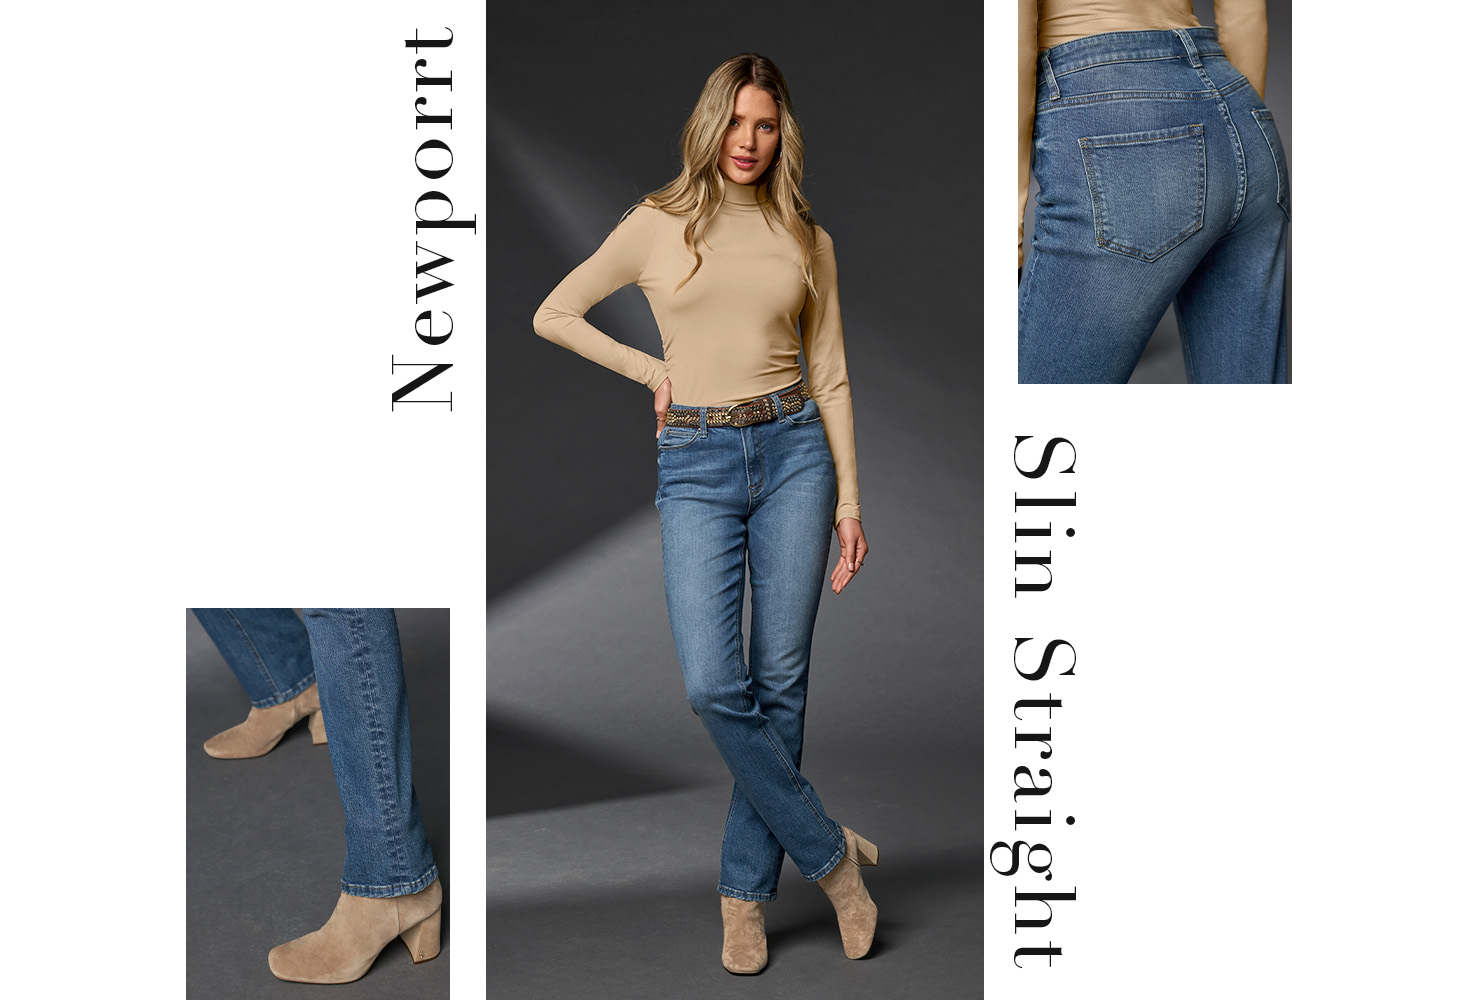 Model wearing light tan turtle neck sweater, embellished belt, newport slim straight medium wash jean and light natural square toe booties. Two close up photos also included of the fit around the back and ankle.